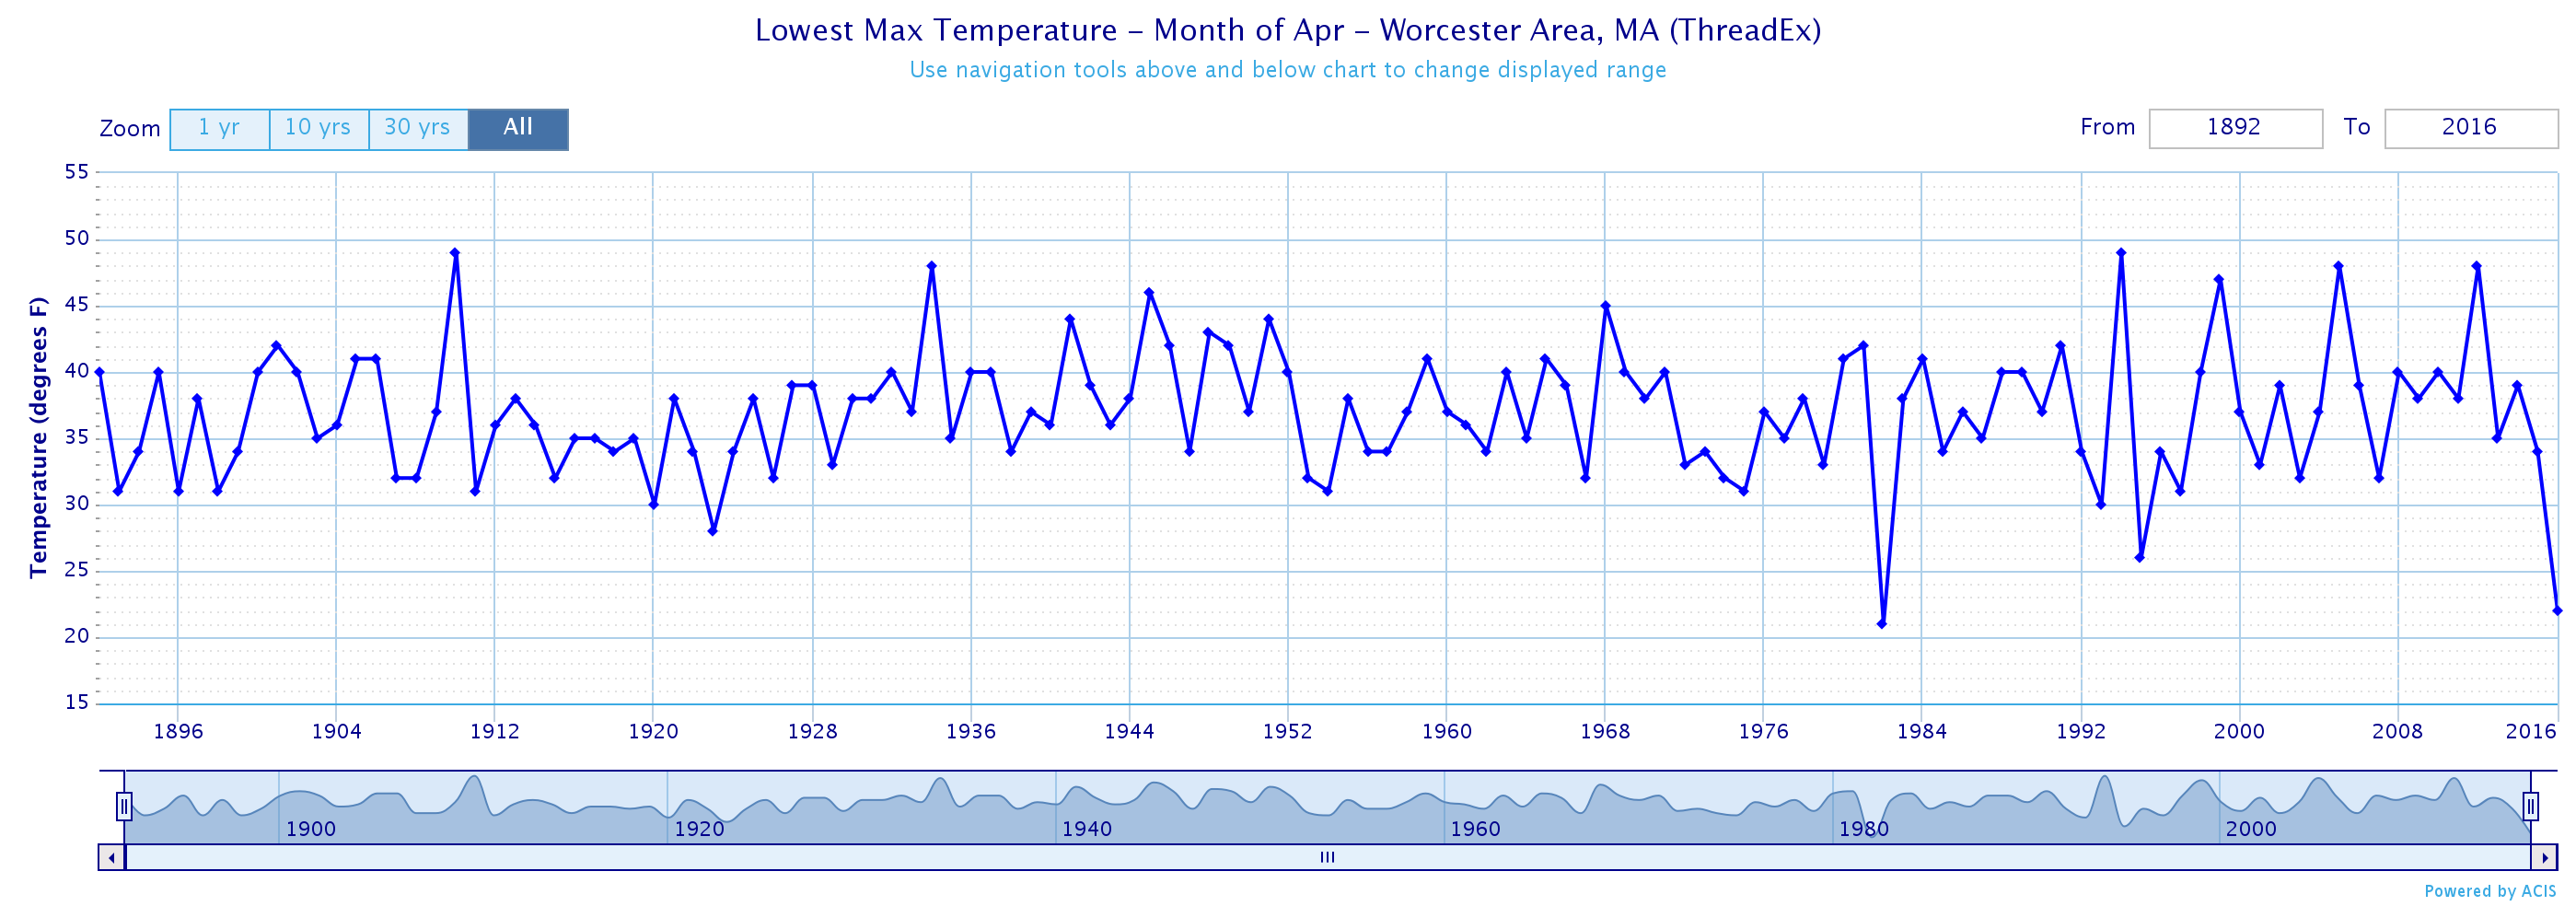 Grpah of coldest high temperatures each year for Worcester for April